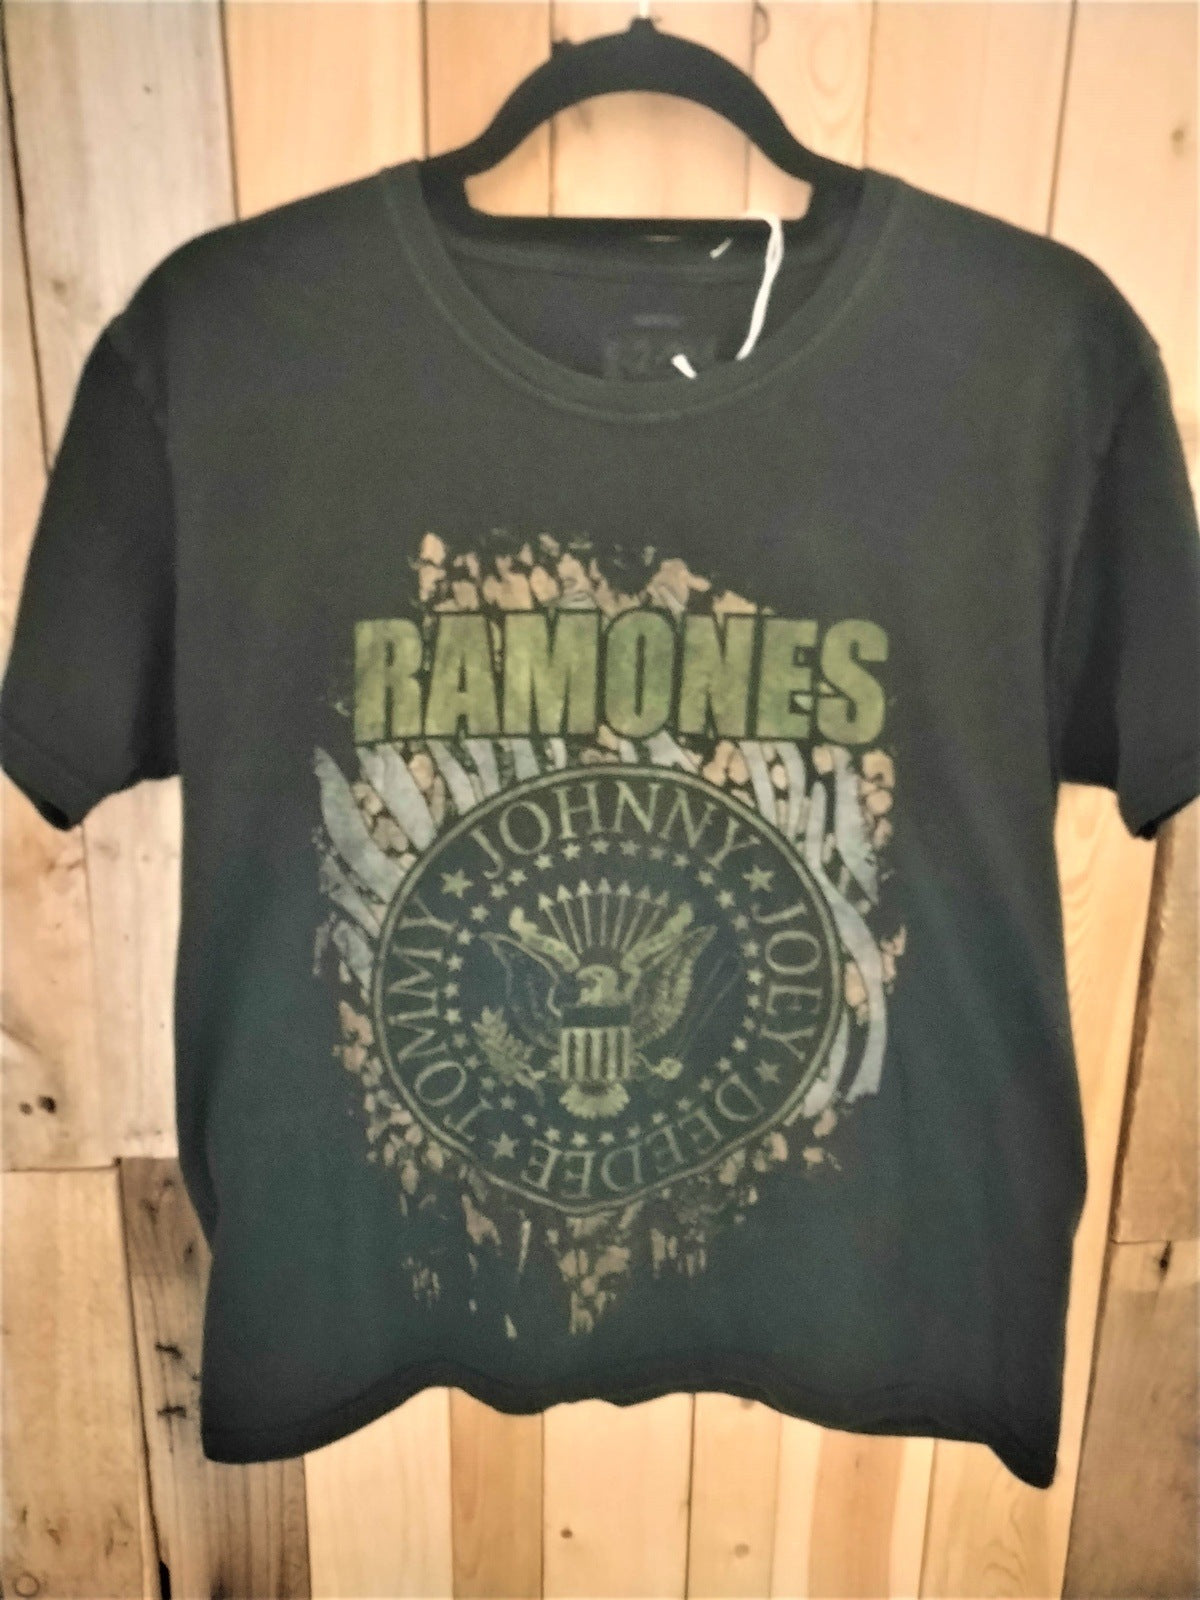 Ramones .1-2-3-4 Official Merchandise T Shirt Size Small 710599